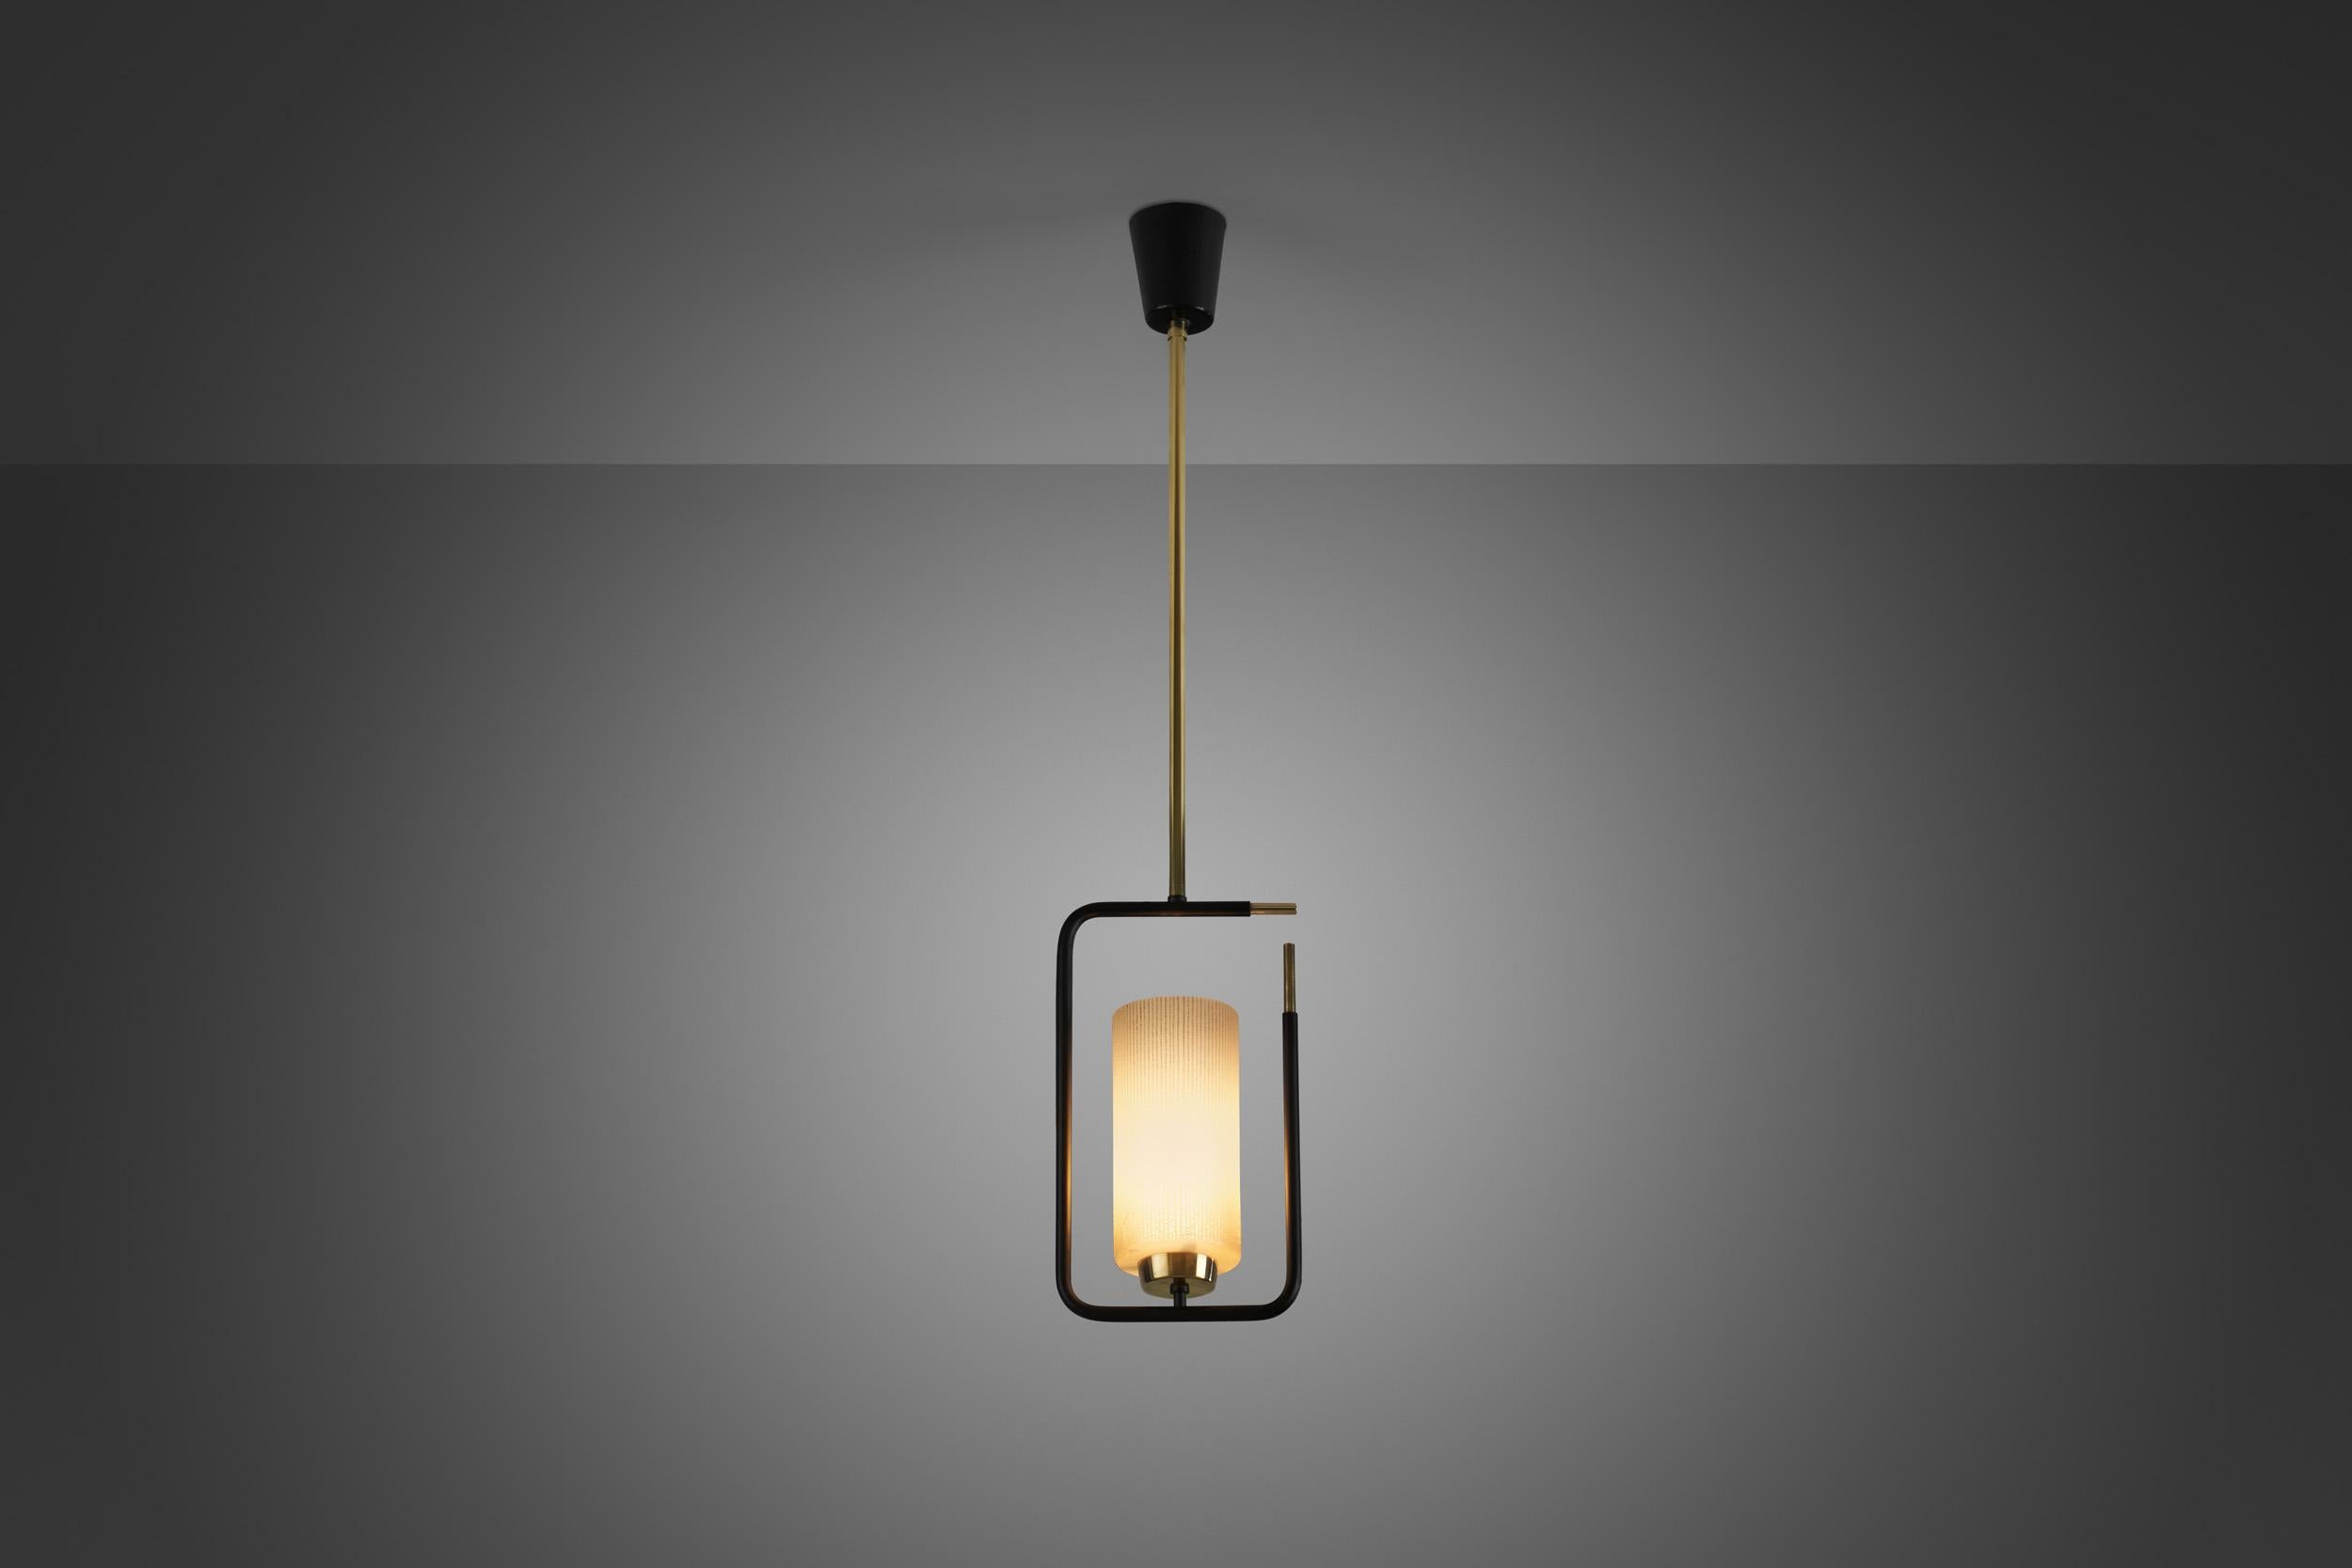 The best thing about pendant lights - besides their stylish look - is that they are the best option to make interiors appear more spacious. They can be used them to concentrate light, or to just add an accent to the room.

This lamp’s design